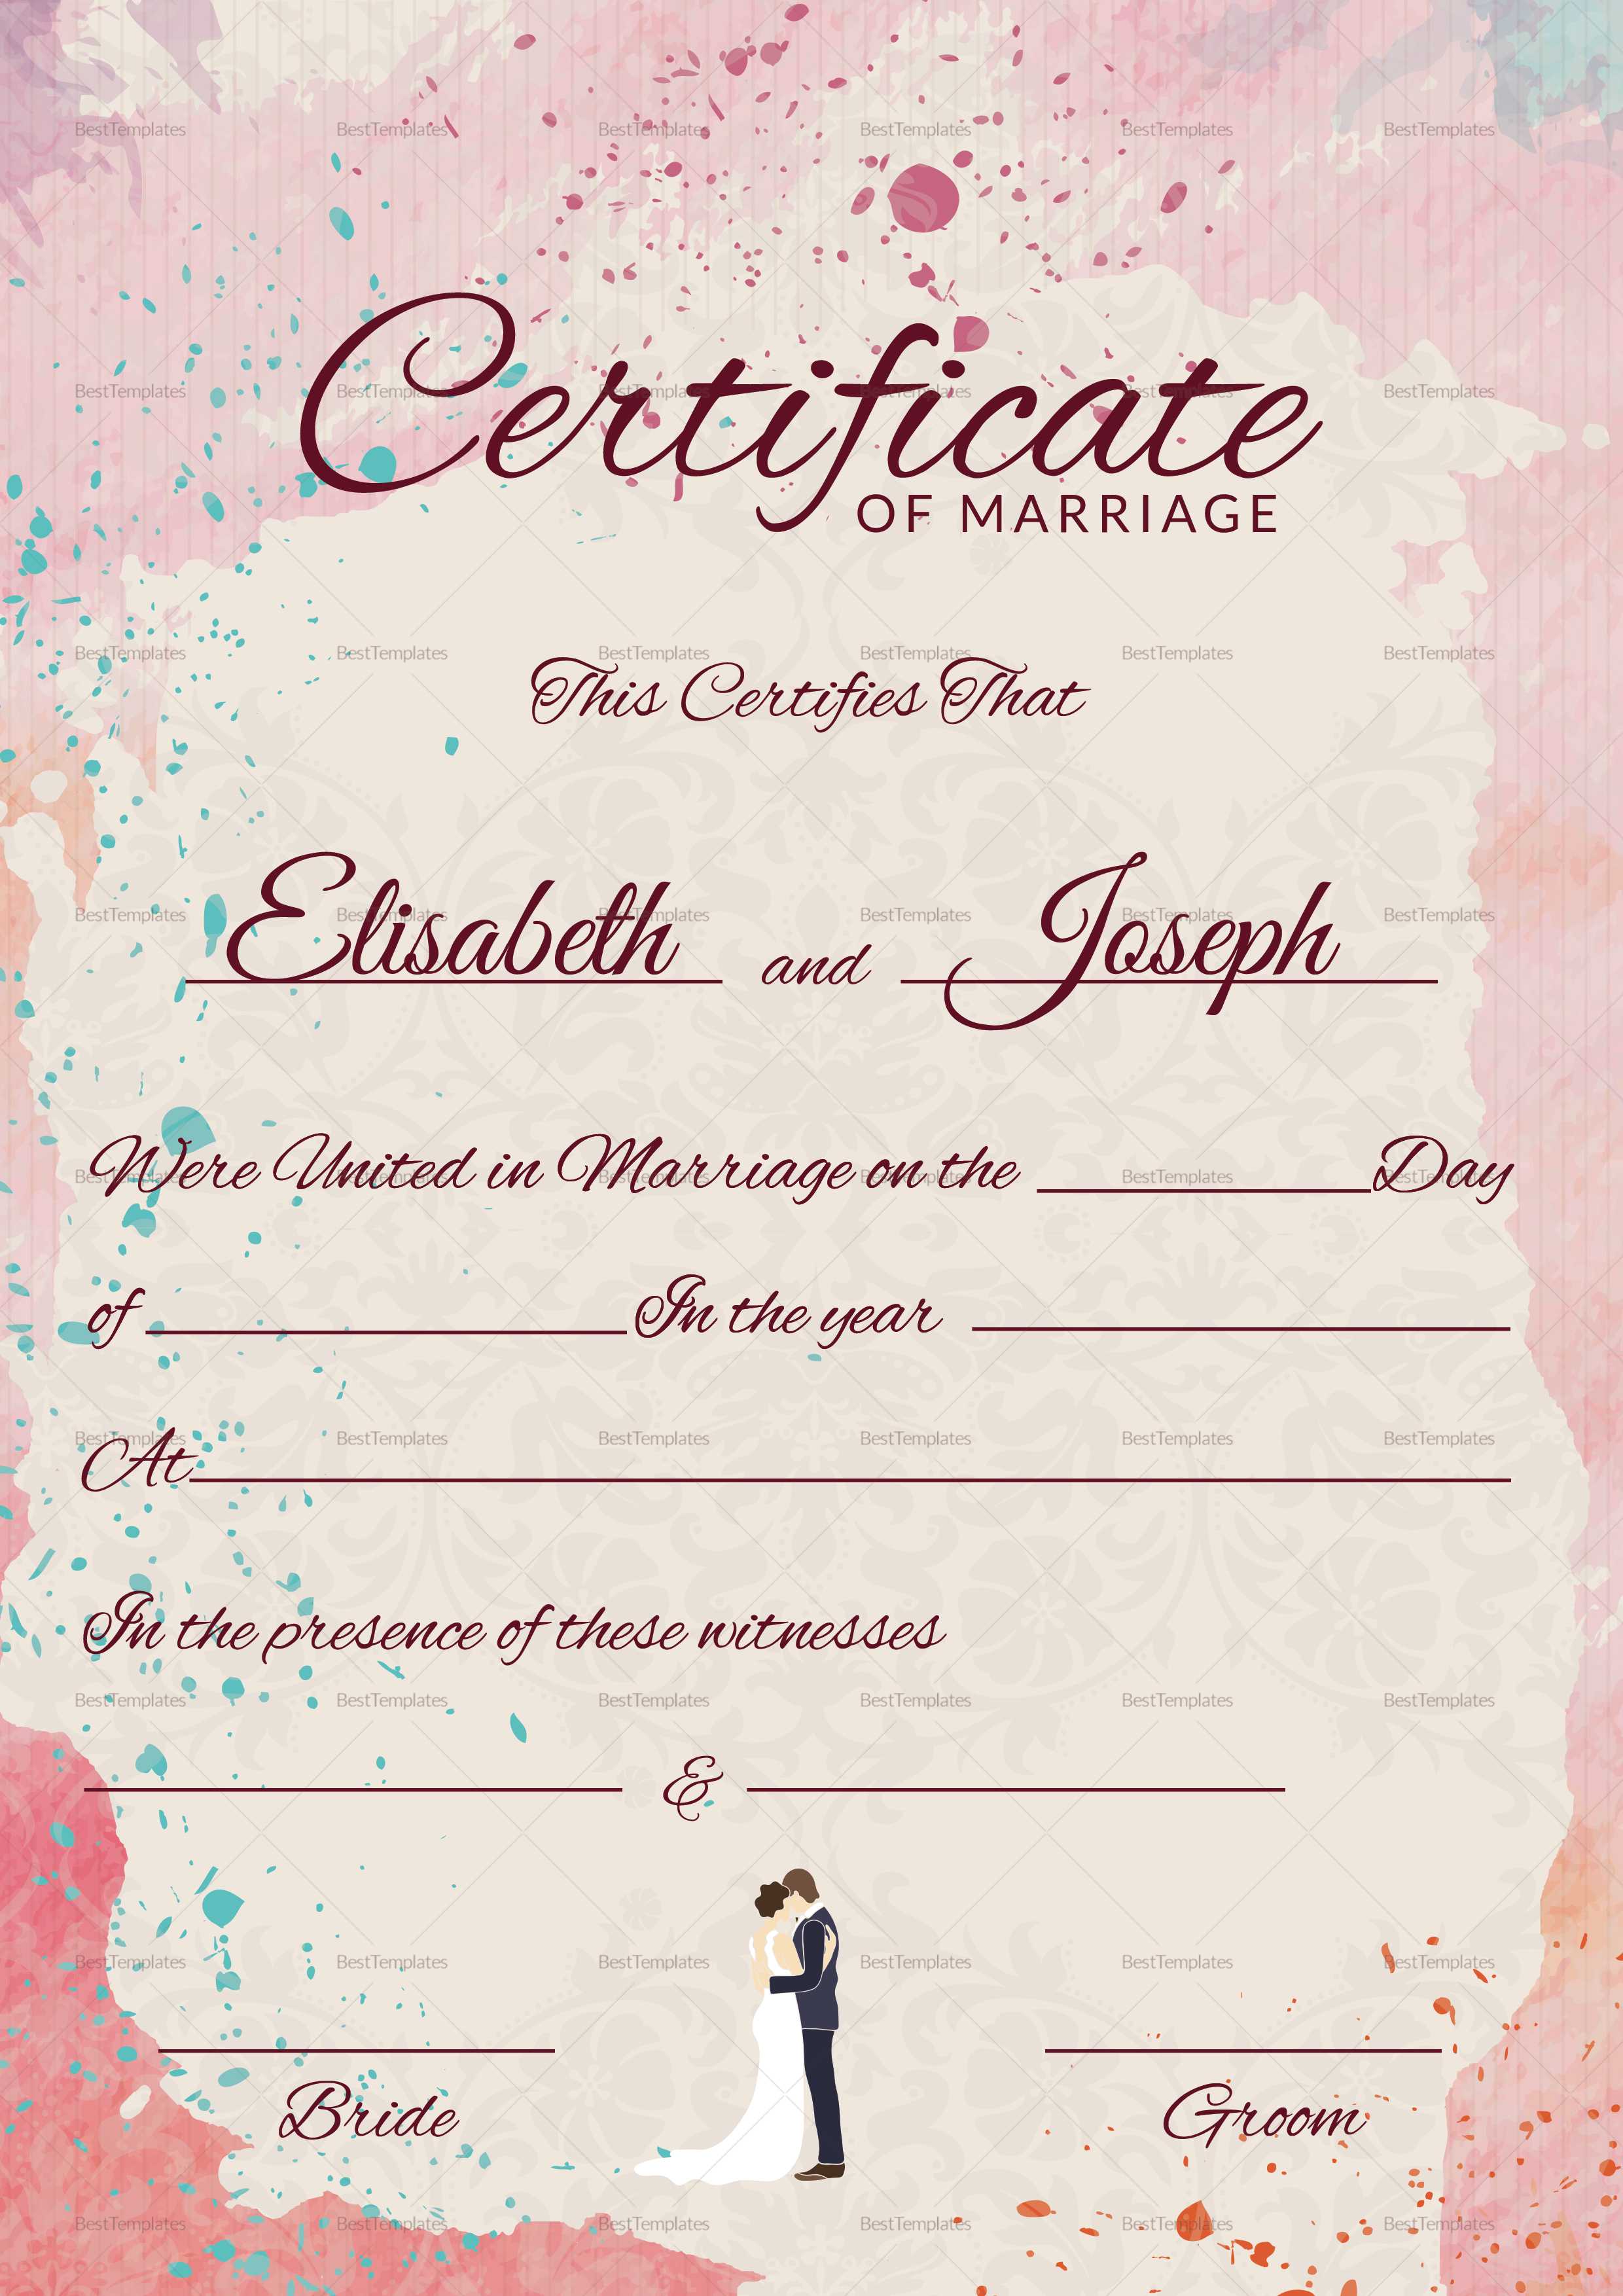 Christian Marriage Certificate Template Pertaining To Christian Certificate Template